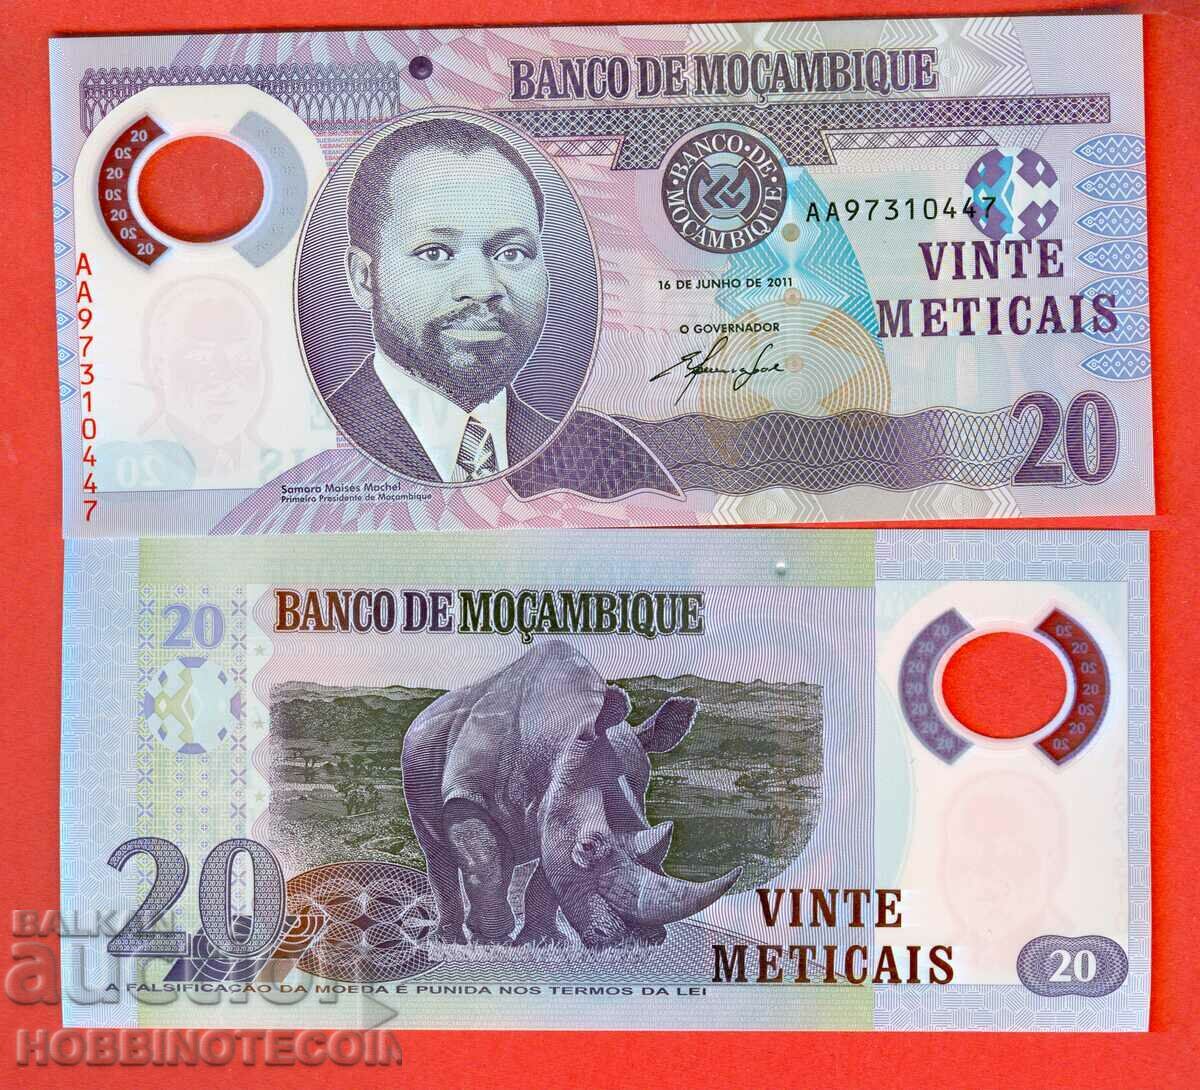 MOZAMBIQUE MOZAMBIQUE 20 Metical issue issue 2011 UNC POLYMER